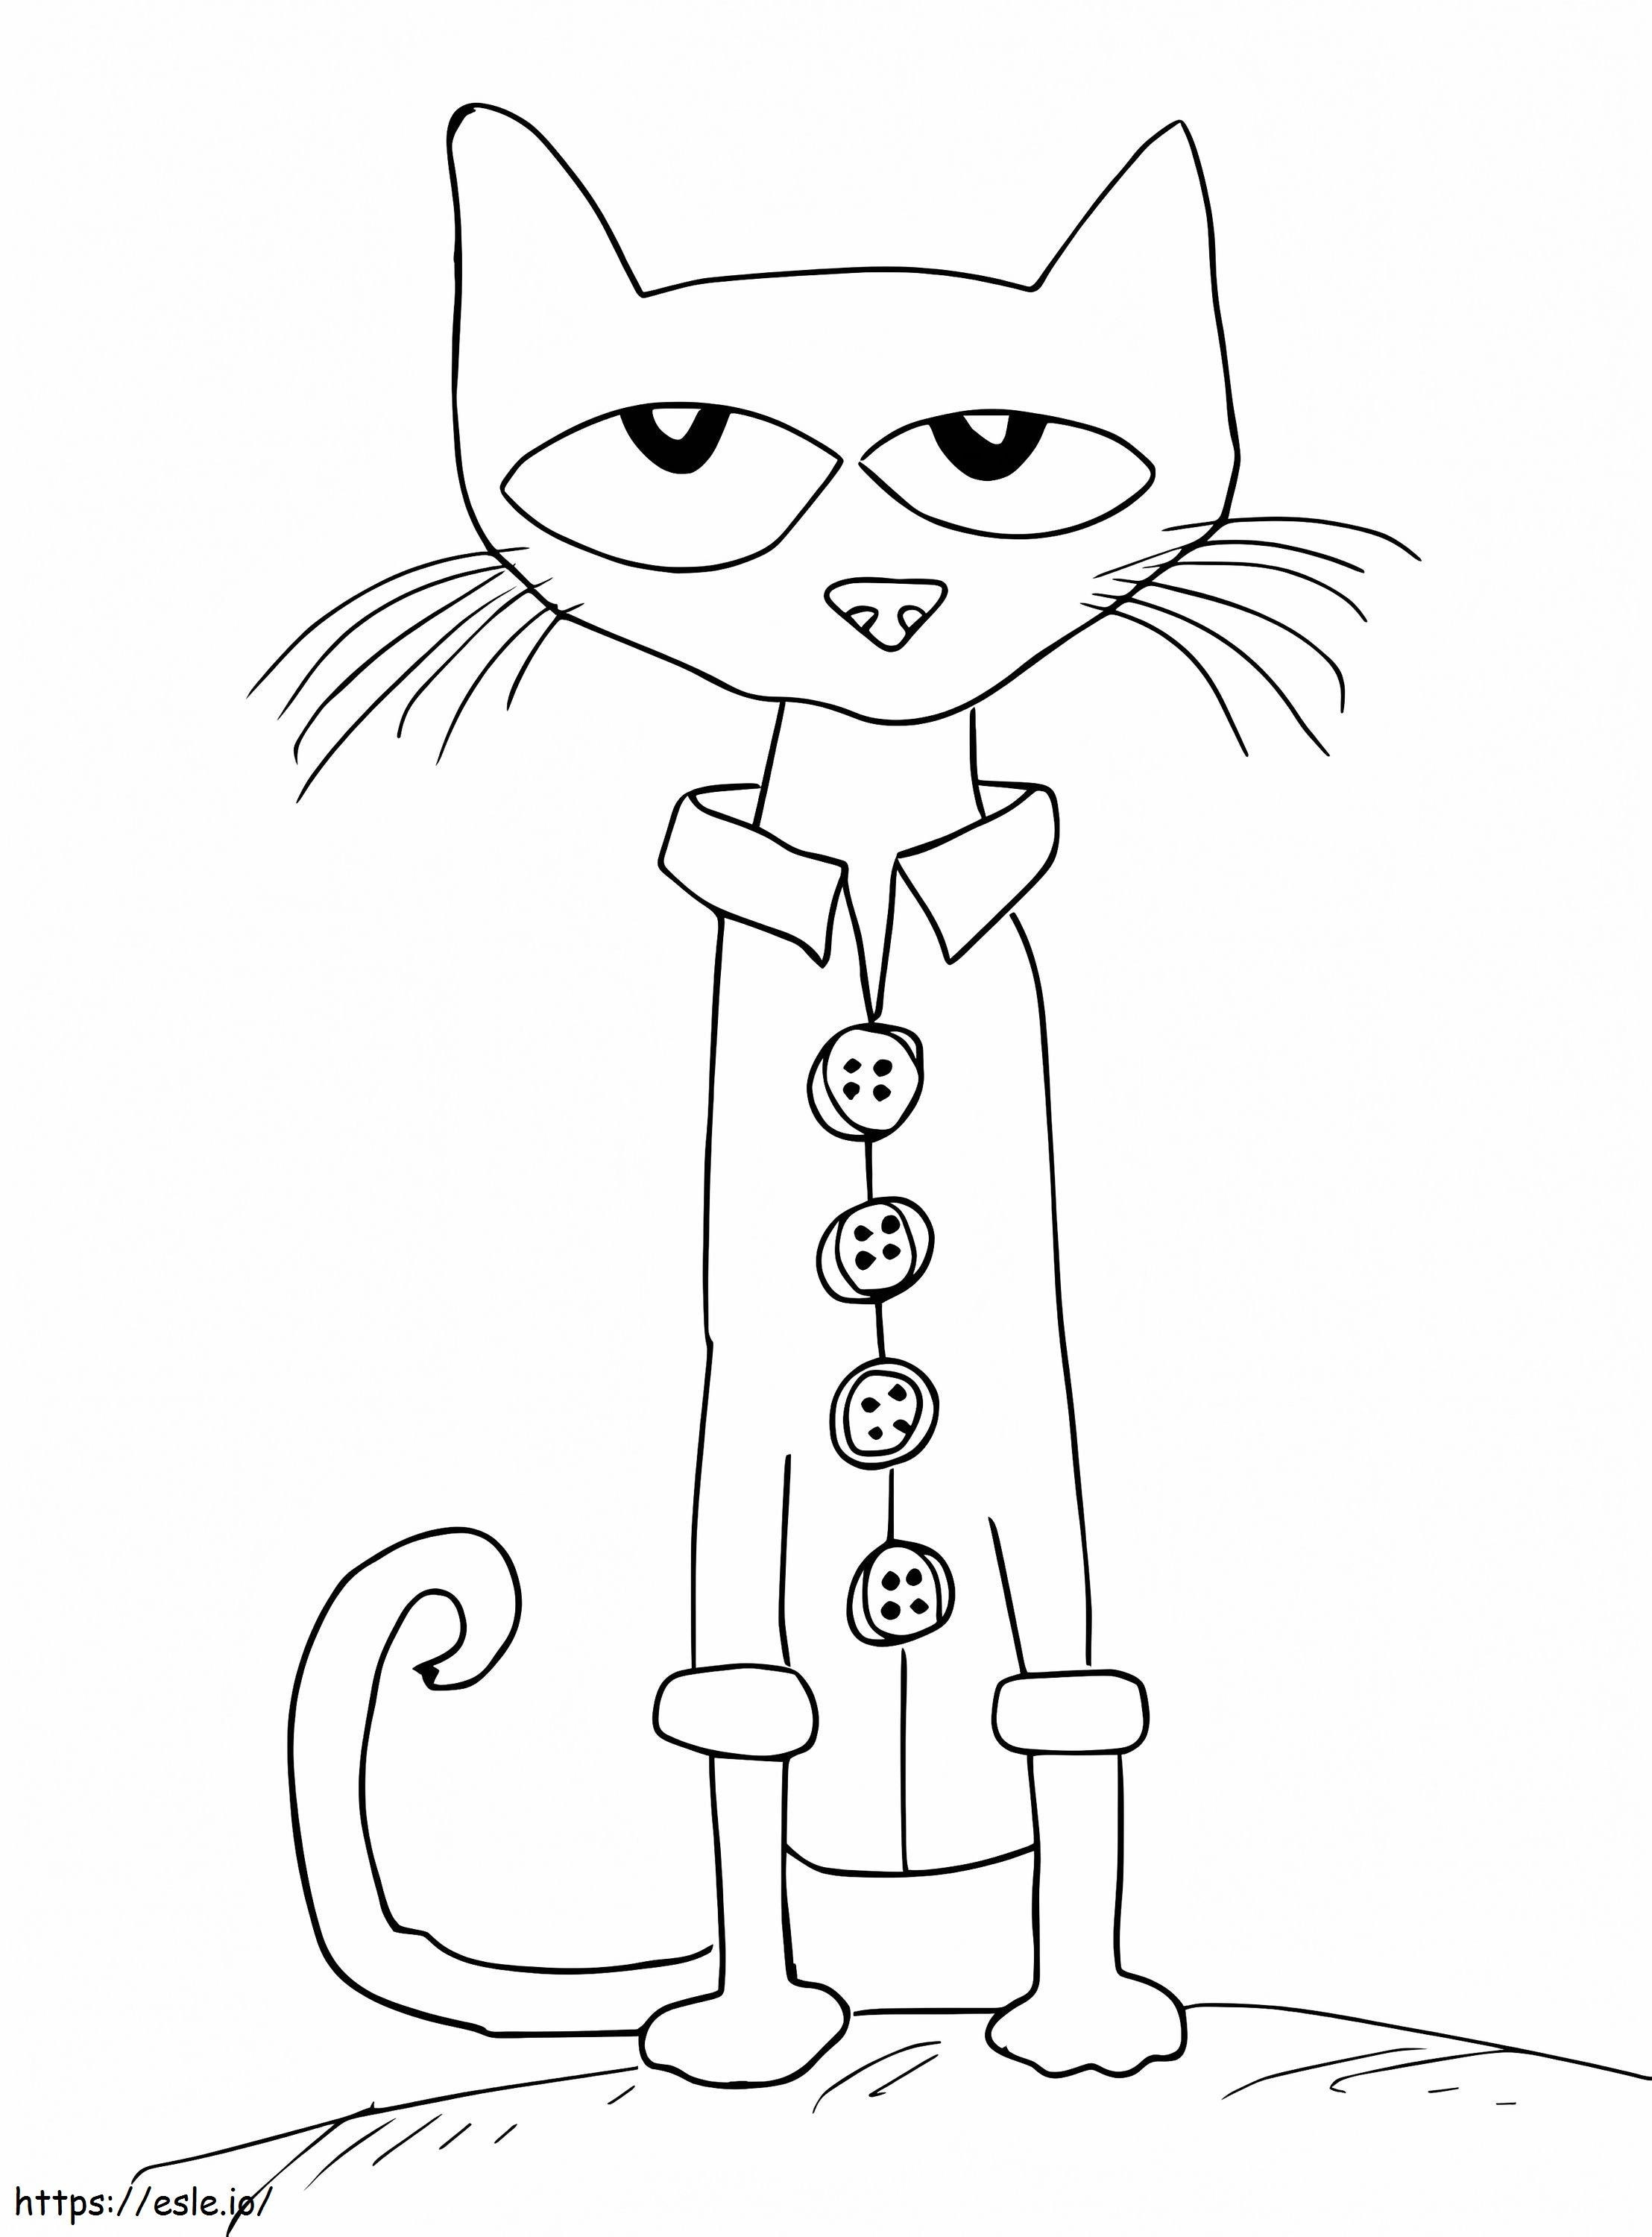 Four Groovy Buttons Pete The Cat coloring page